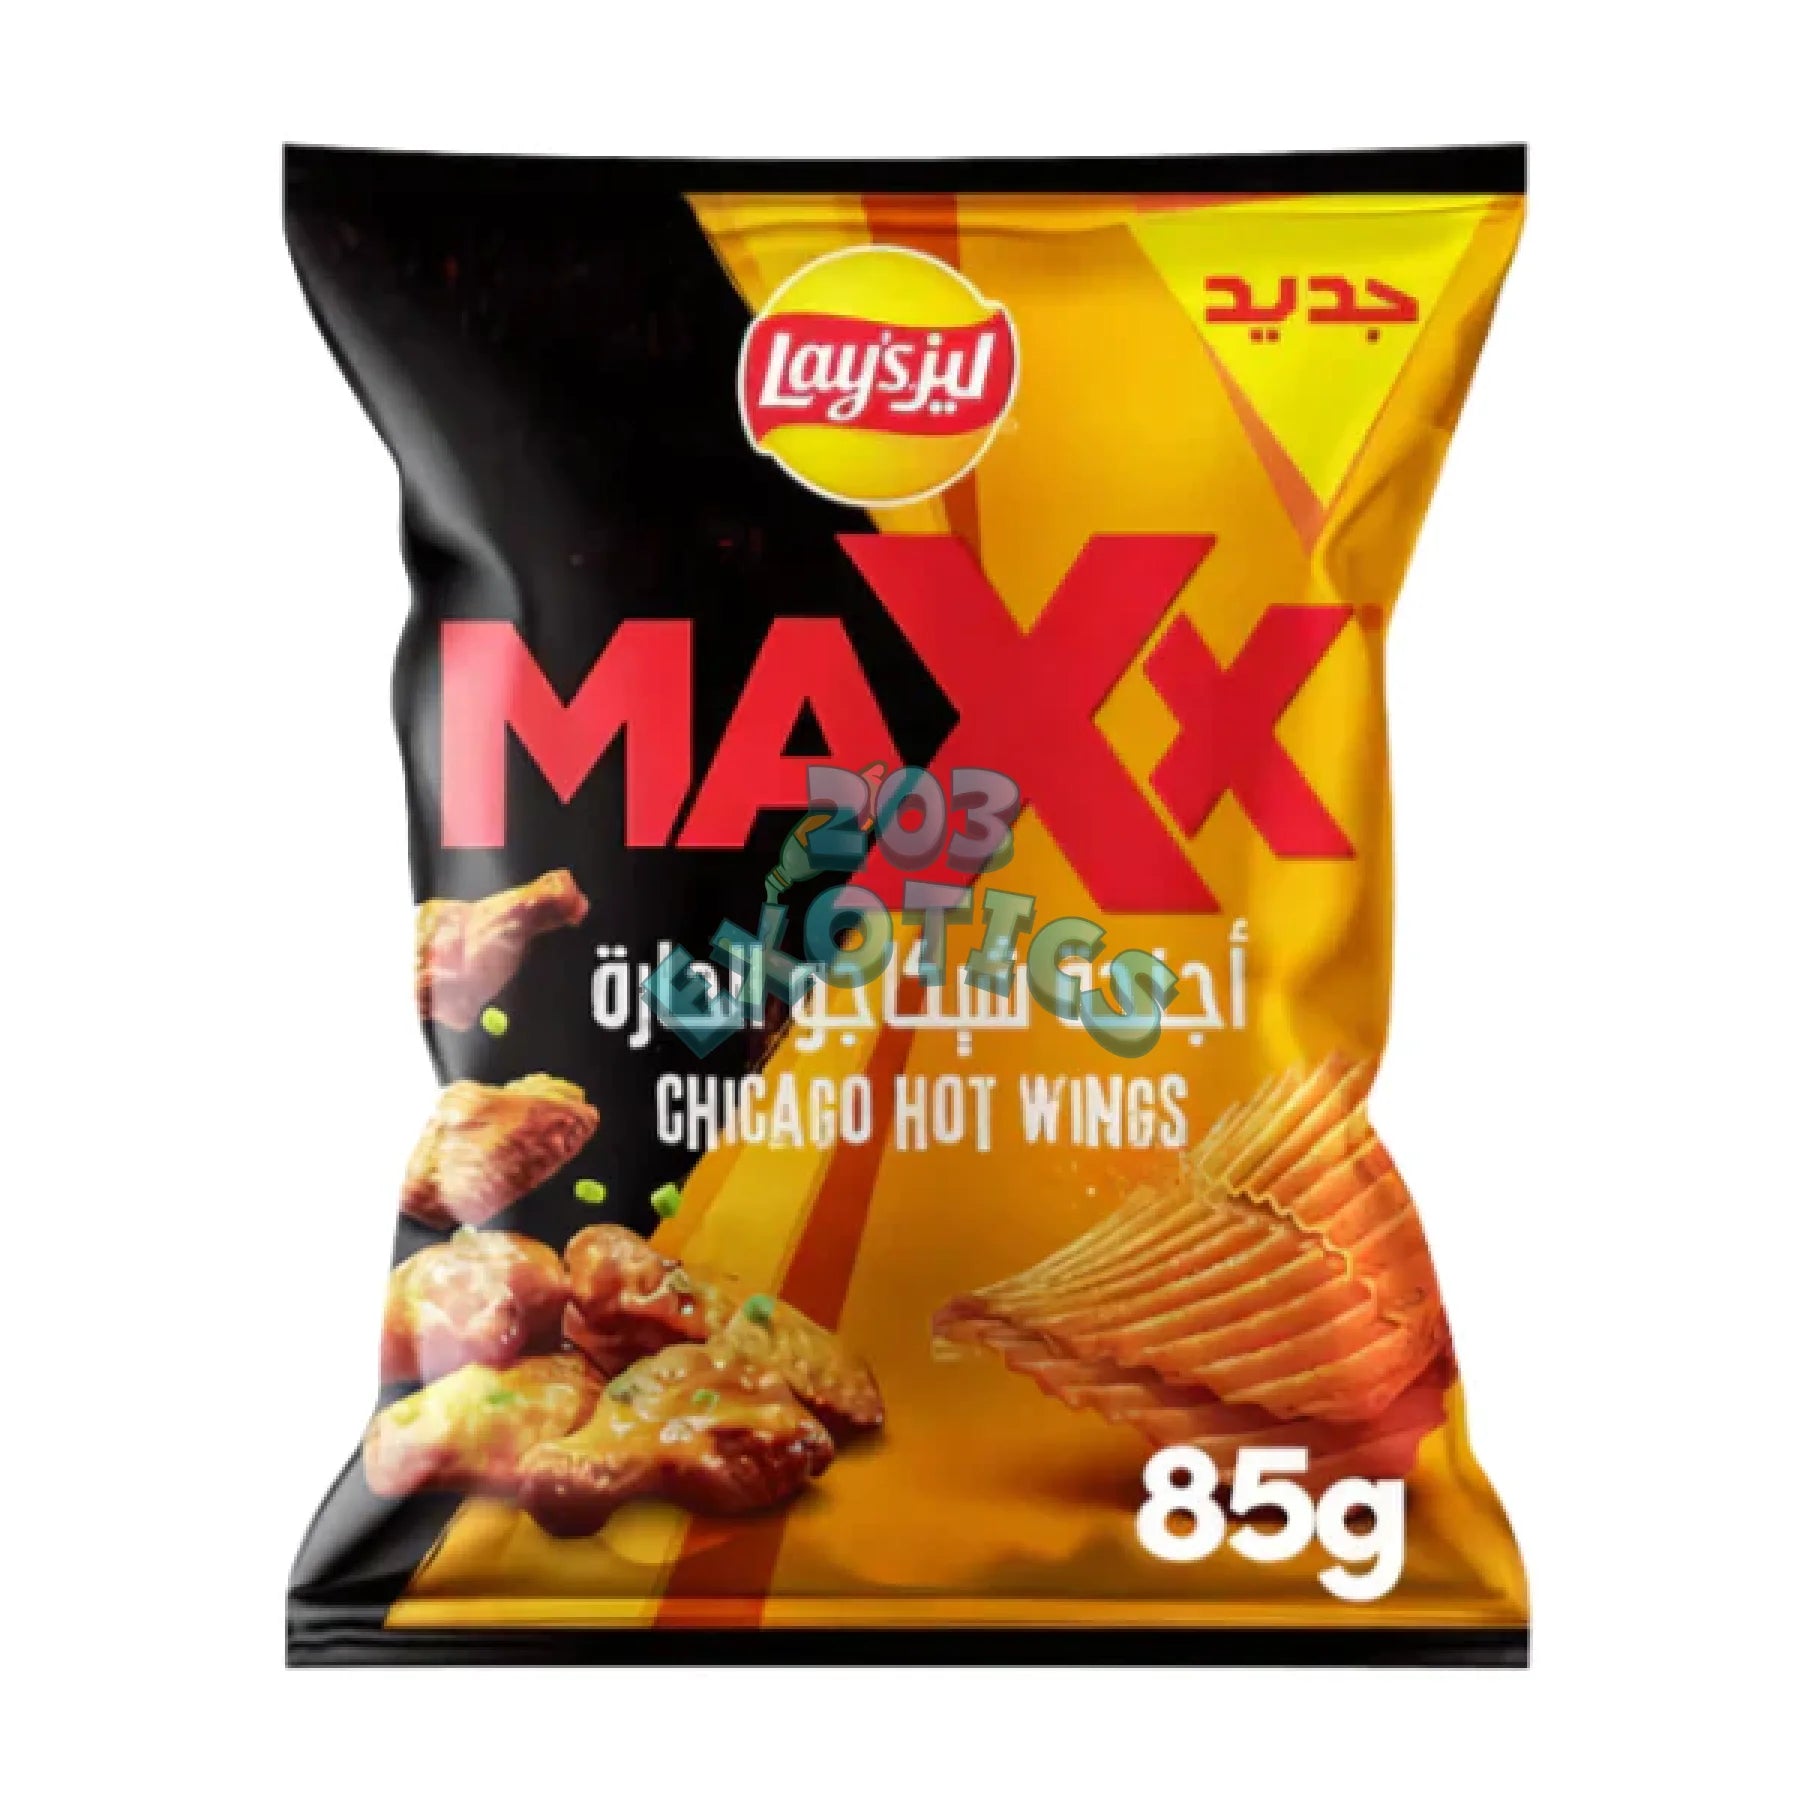 Lay’s Maxx Chicago Hot Wings (85G) Chips